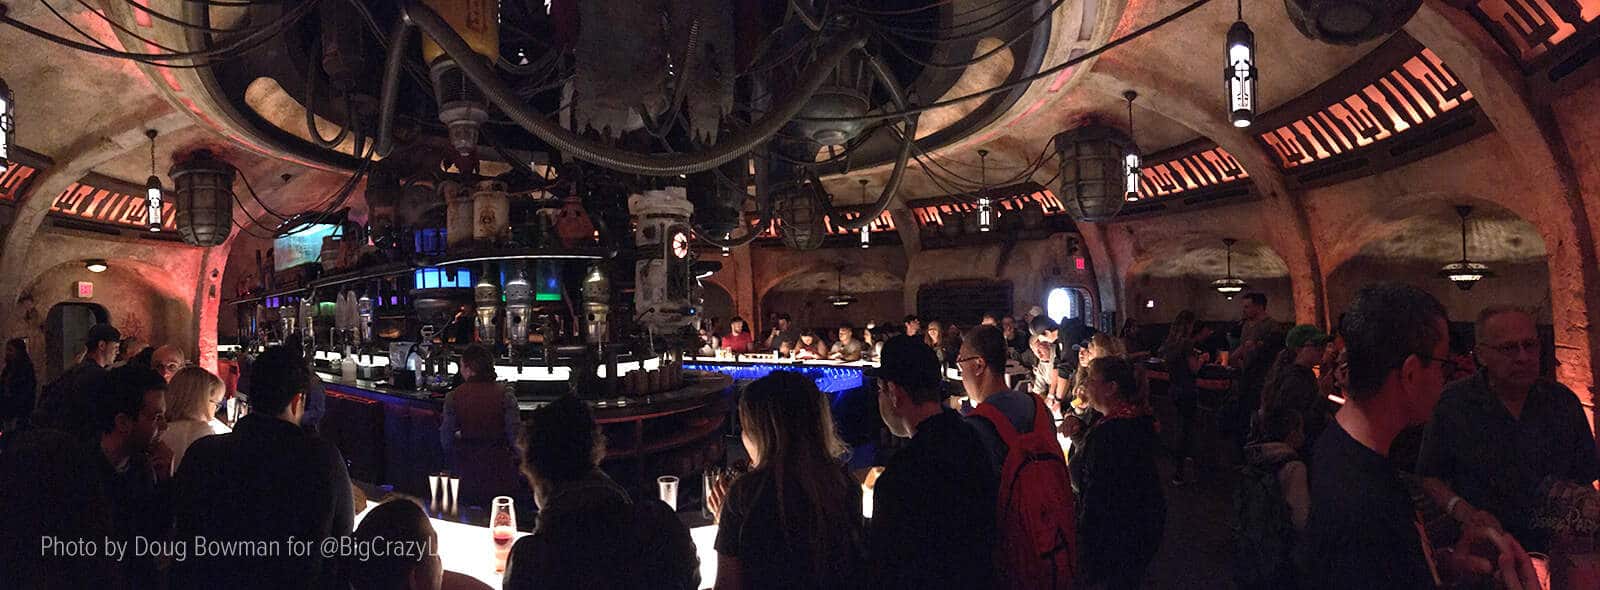 A panoramic shot of the interior of Oga's Cantina